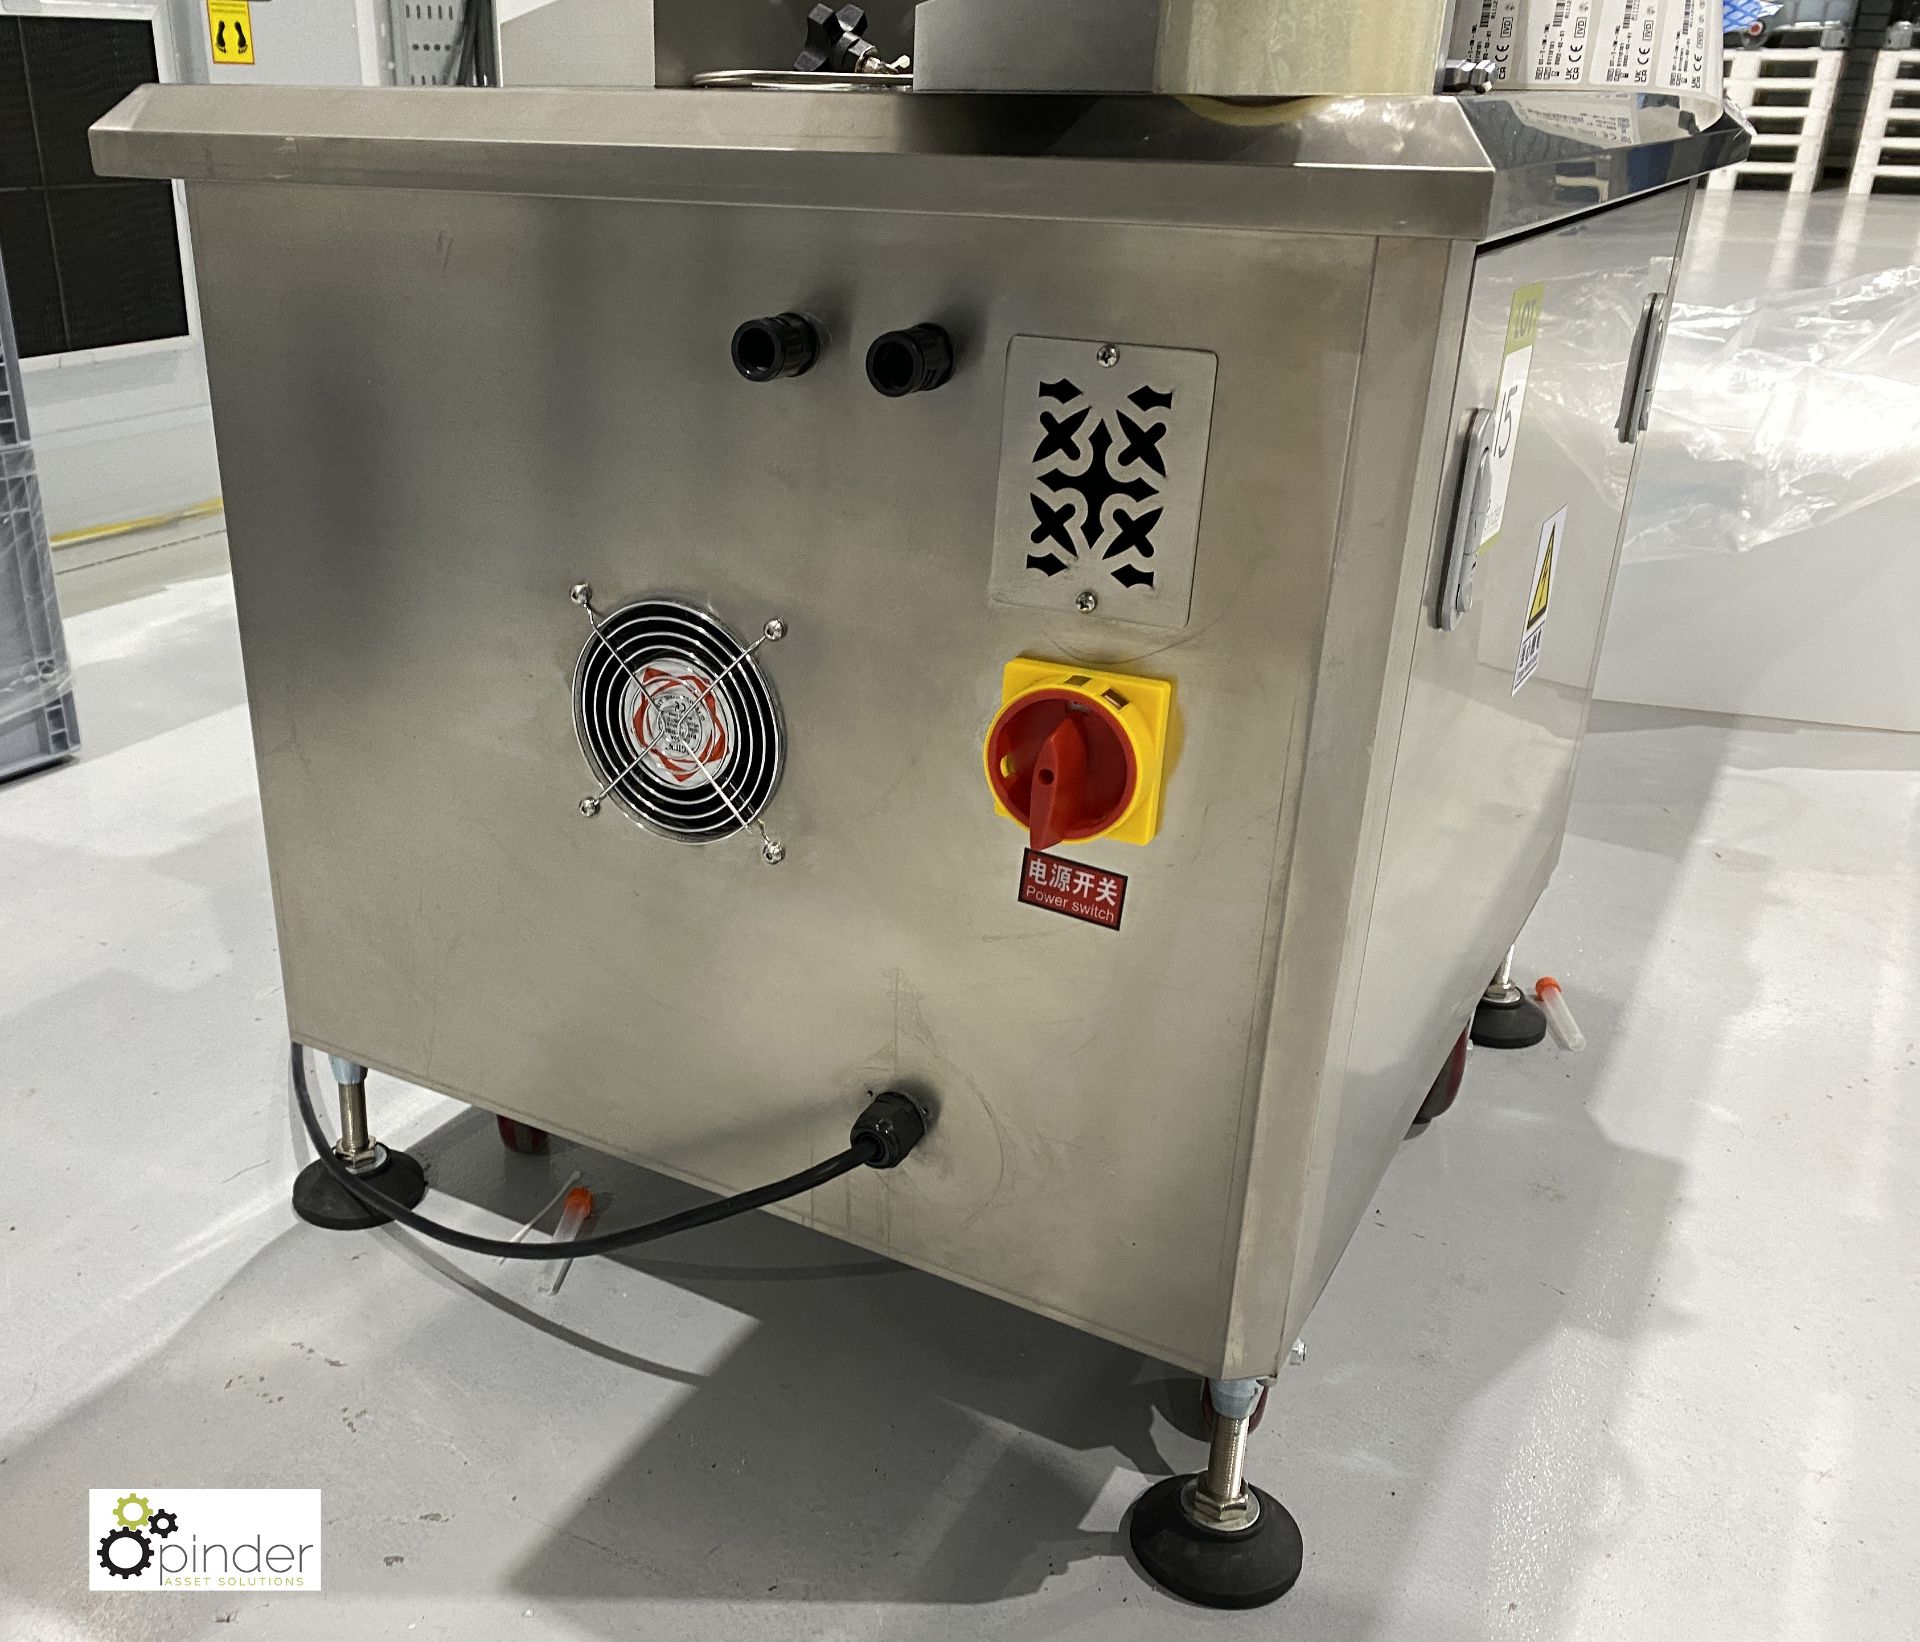 Brightwin Packaging Machinery Co Ltd BWL stainless steel Labeller for use applying labels to - Image 13 of 13